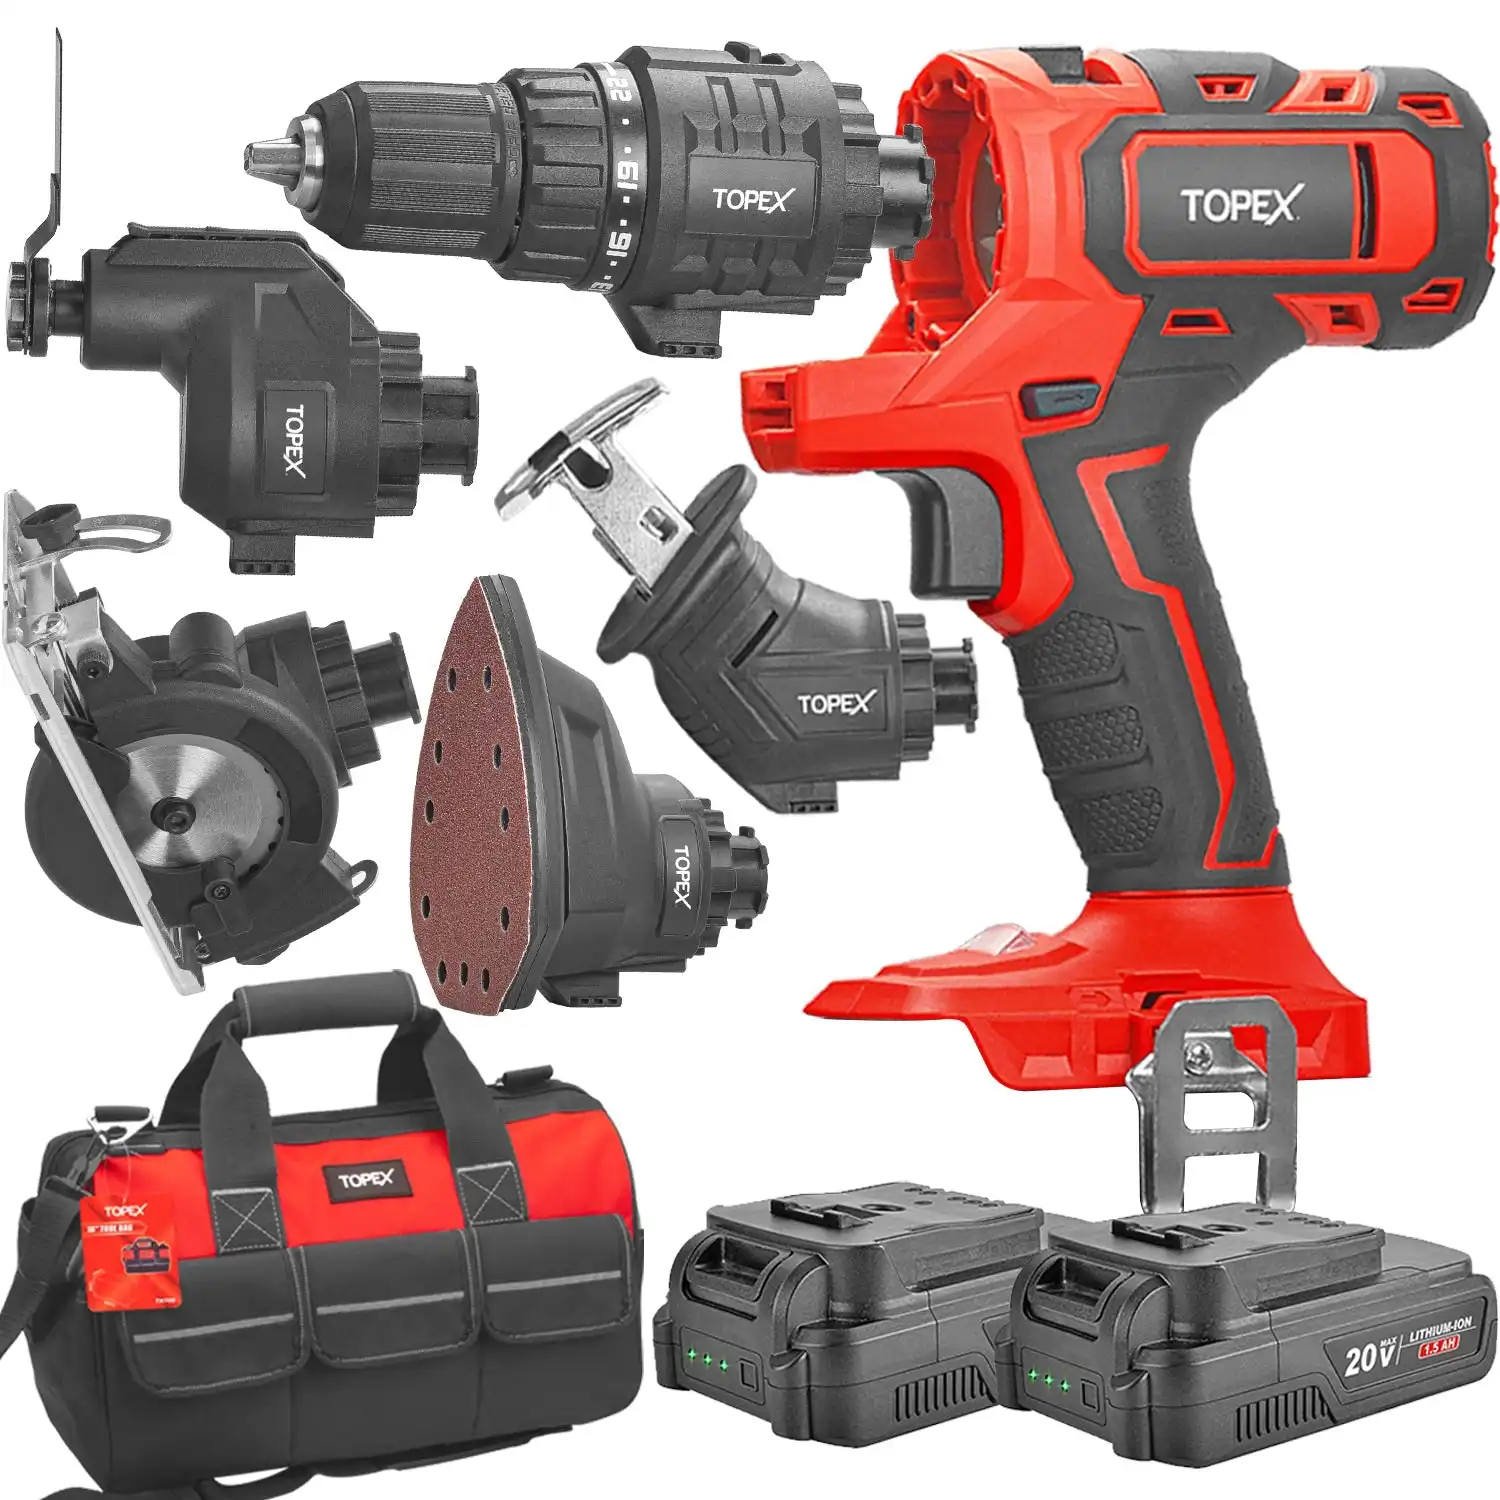 Topex 20V 5 IN1 Power Tool Combo Kit Cordless Drill Driver Sander Electric Saw w/ 2 Batteries & Tool Bag